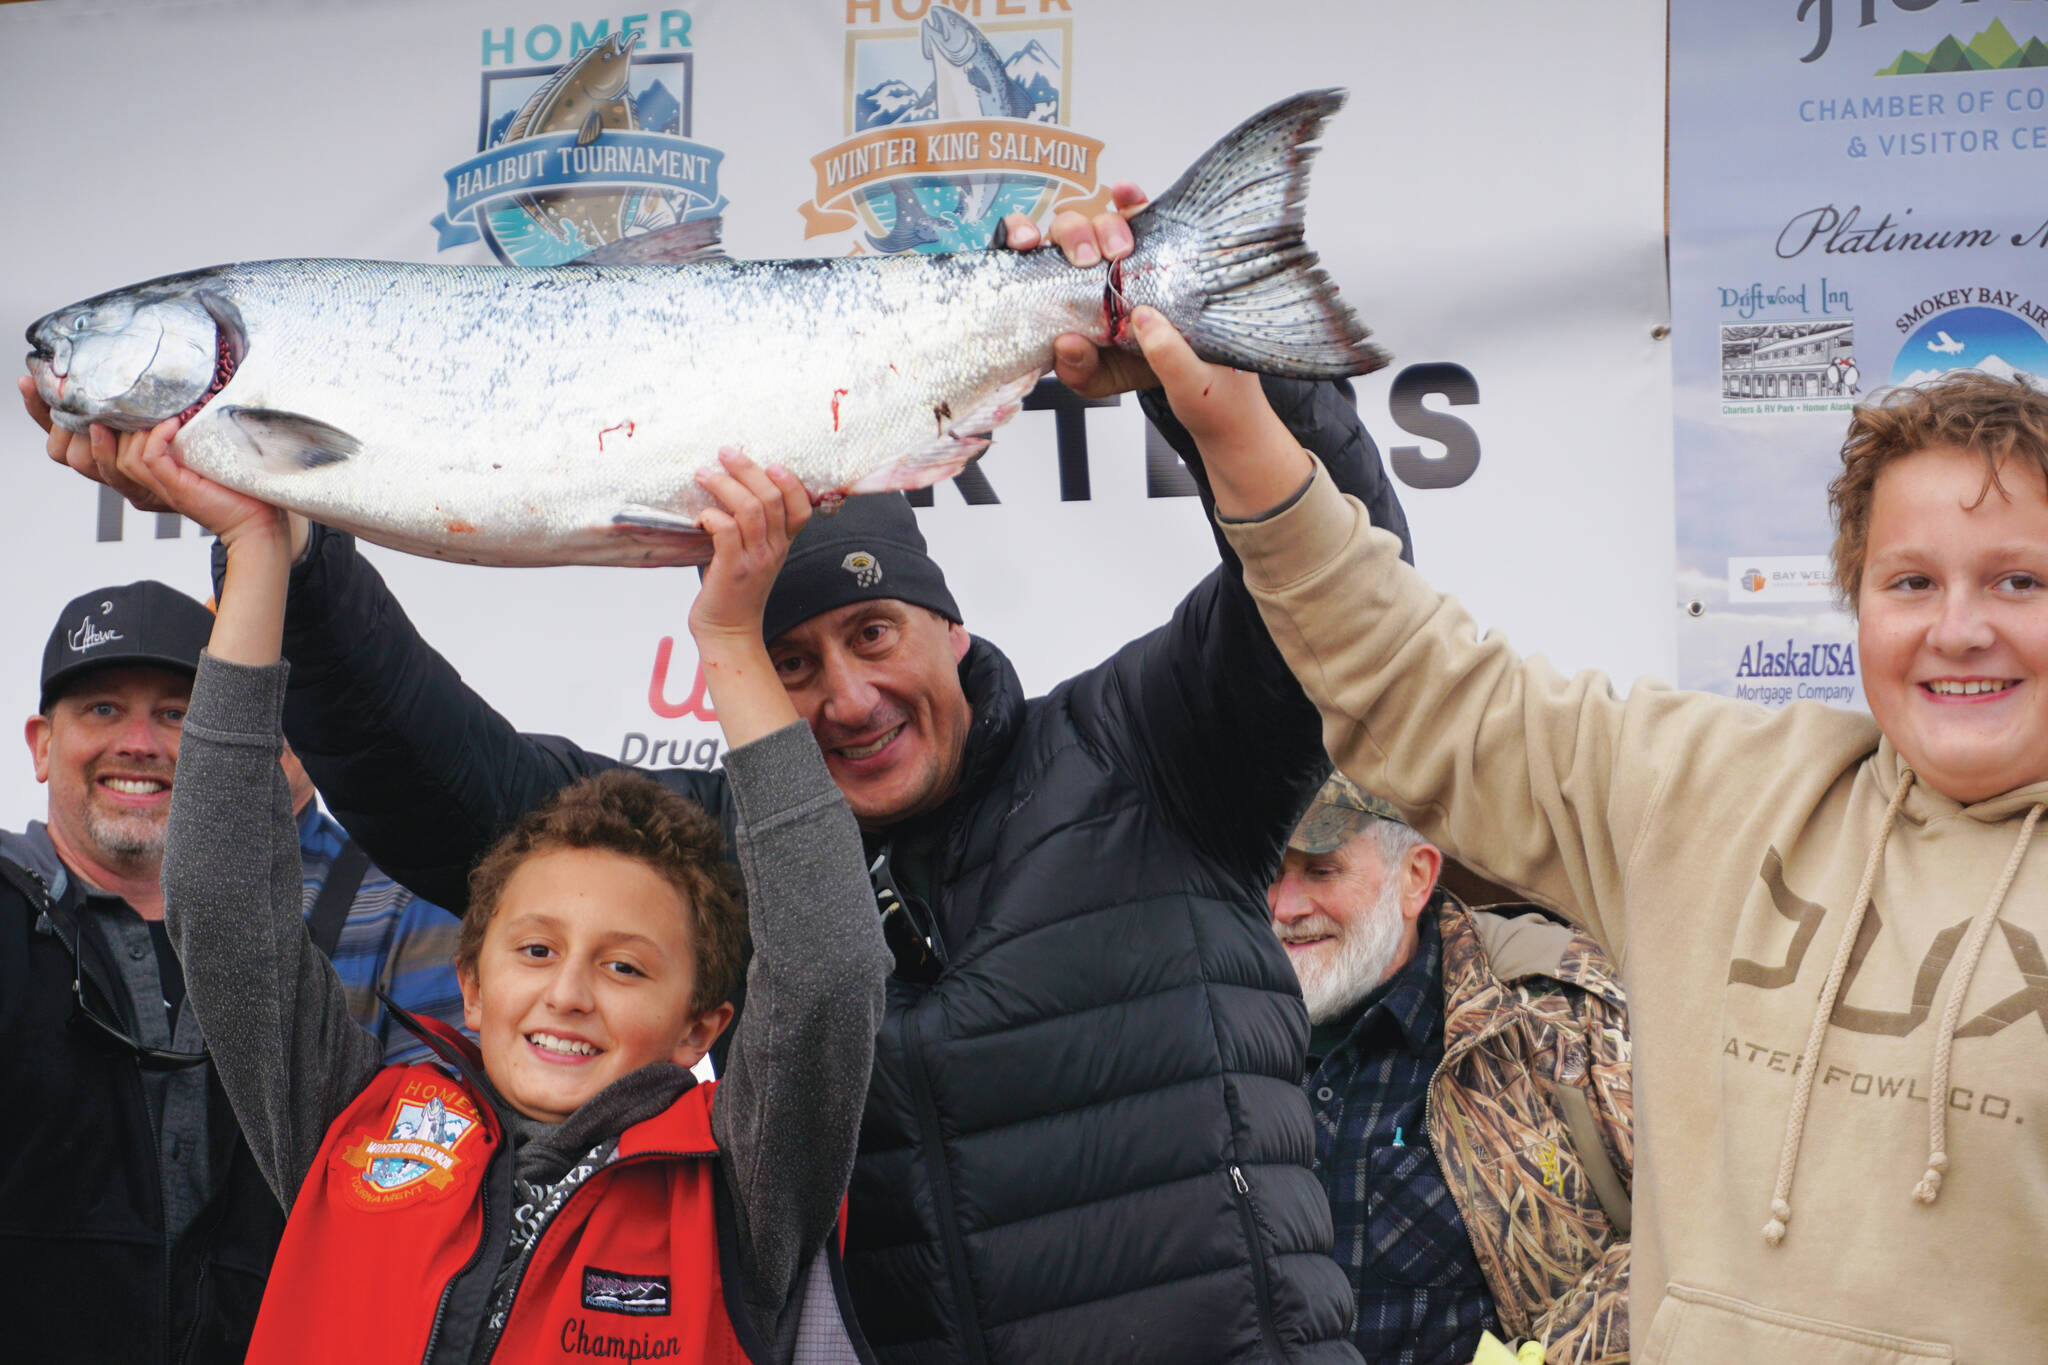 Andrew Marley, the 2021 Homer Winter King Salmon Tournament winner, at left, holds his prize winning 25.62-pound white king salmon on Saturday, April 17, on the Homer Spit in Homer. Helping him are his father, Jay Marley, center, and older brother Weston Marley, right. The family team included Erica Marley, not shown, all fishing on the Fly Dough. (Photo by Michael Armstrong/Homer News)